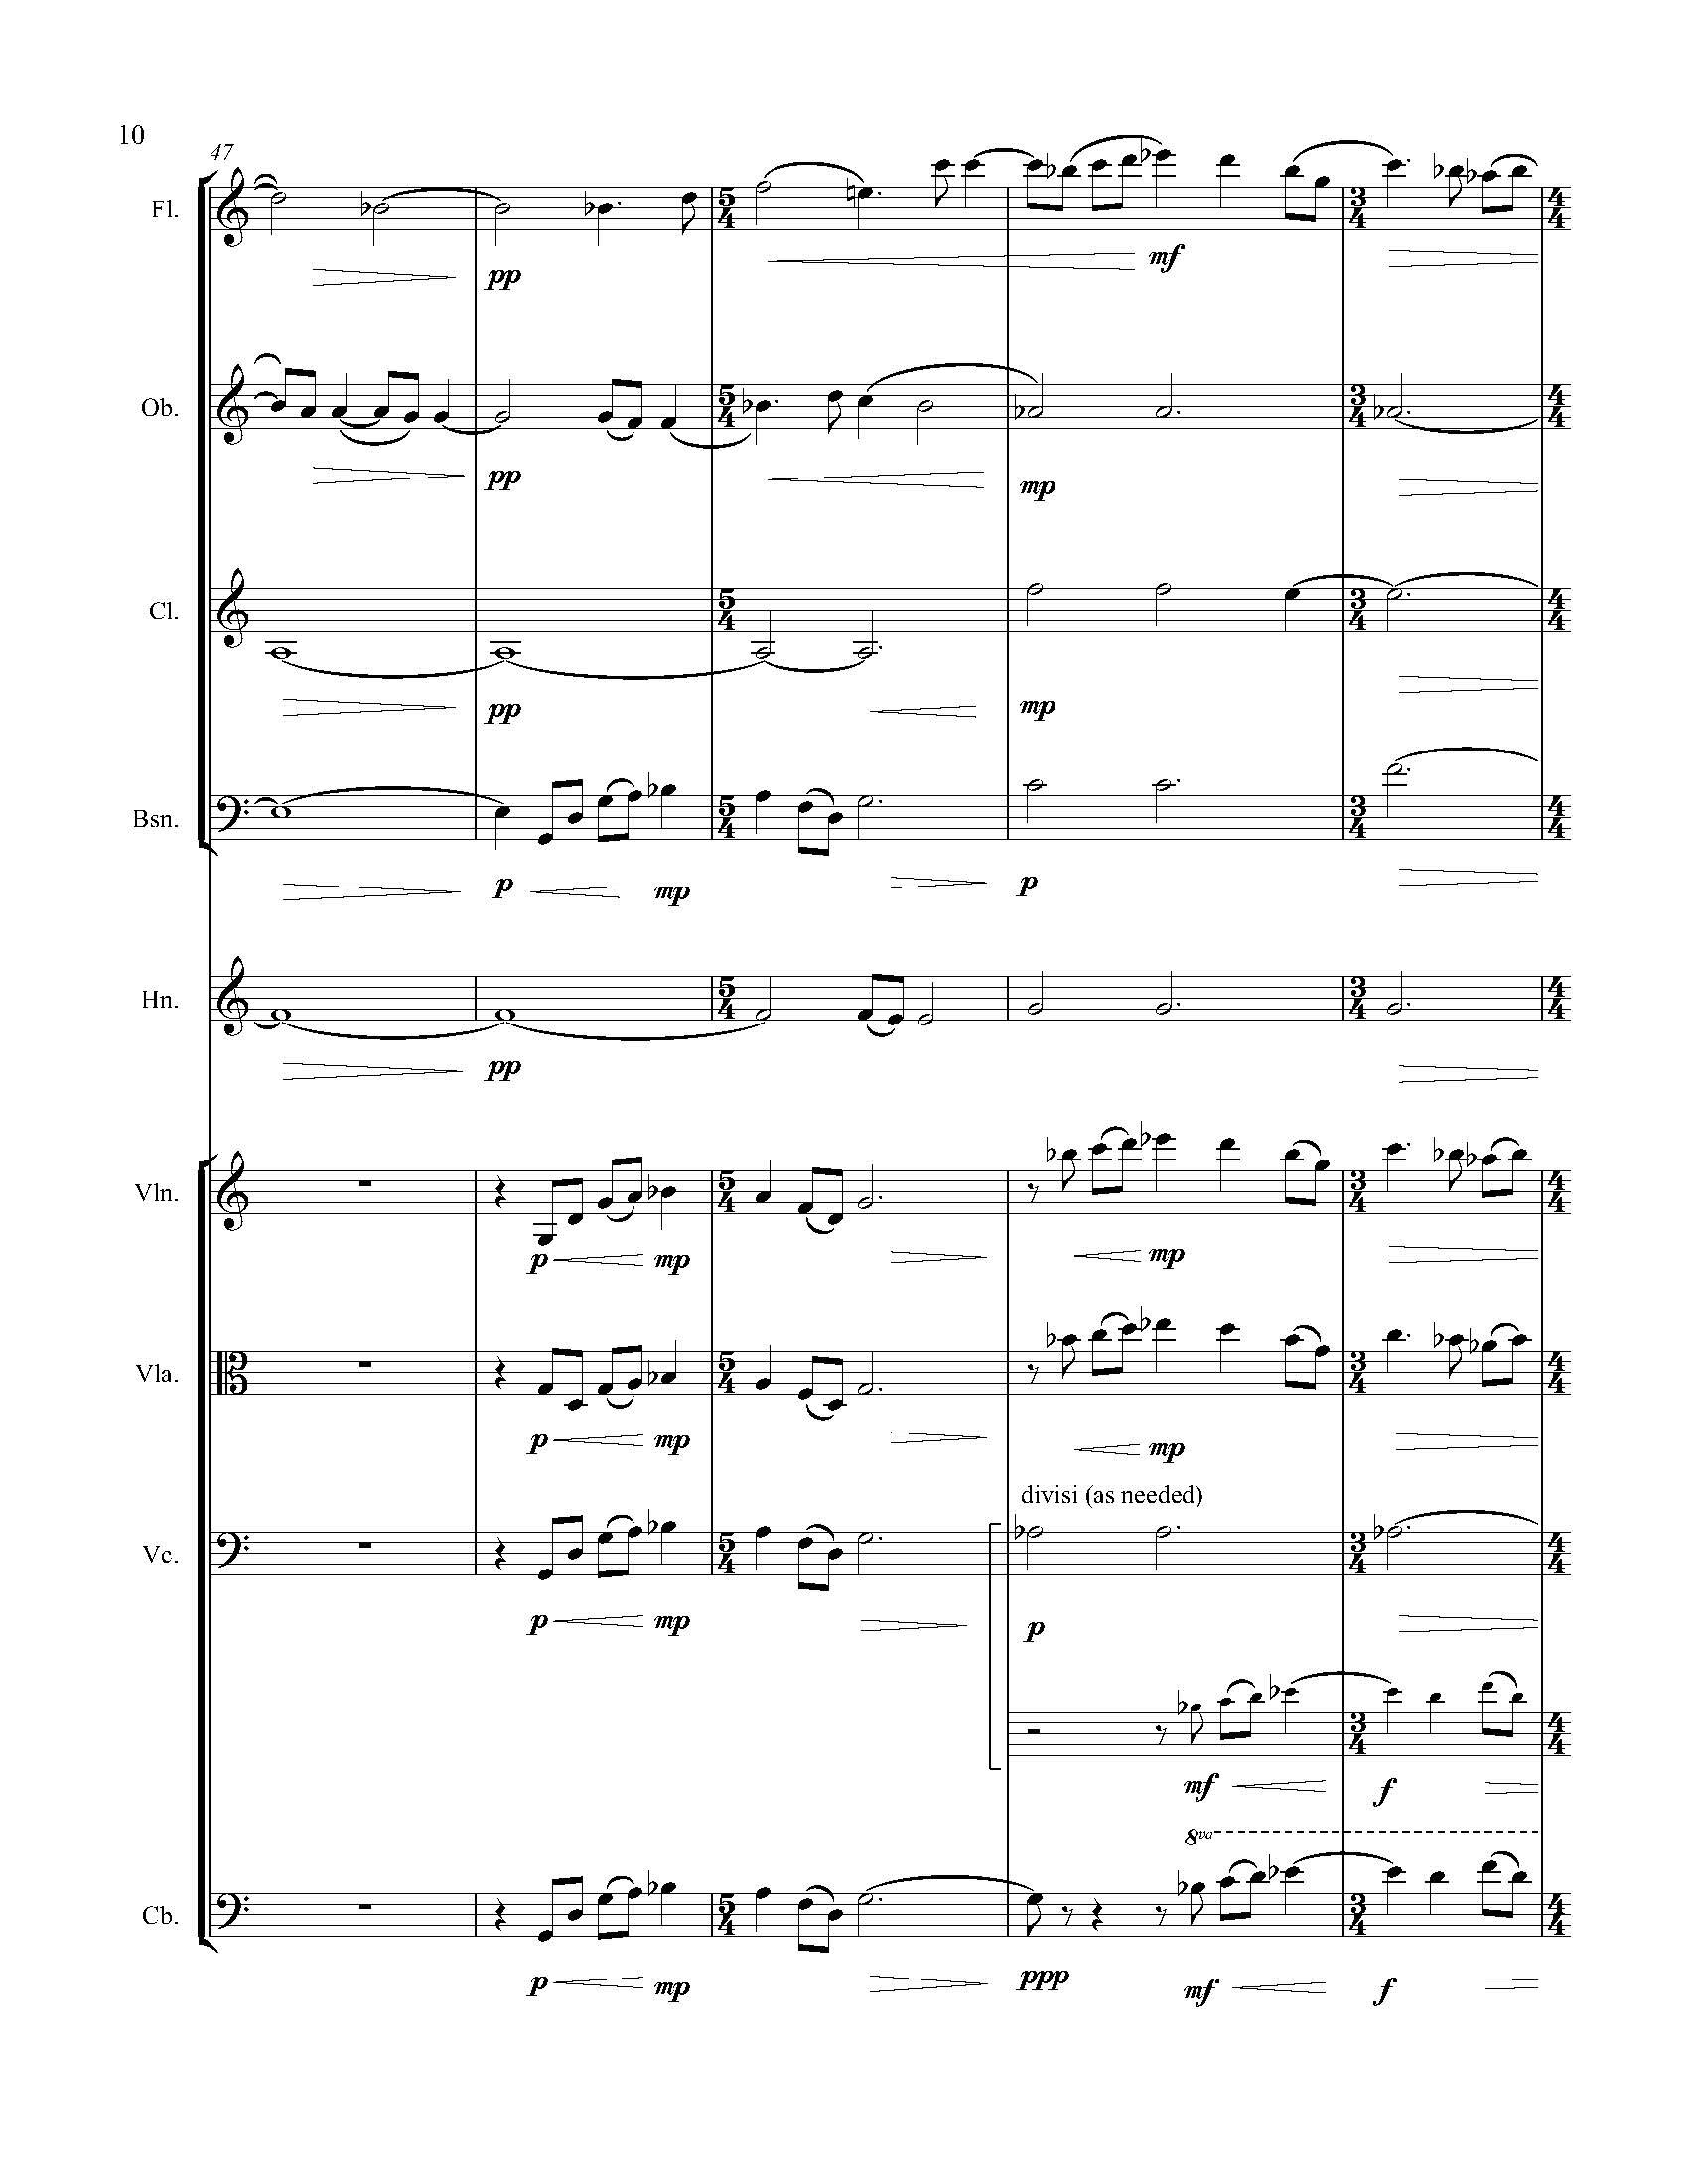 In Search of a Bird - Complete Score_Page_16.jpg